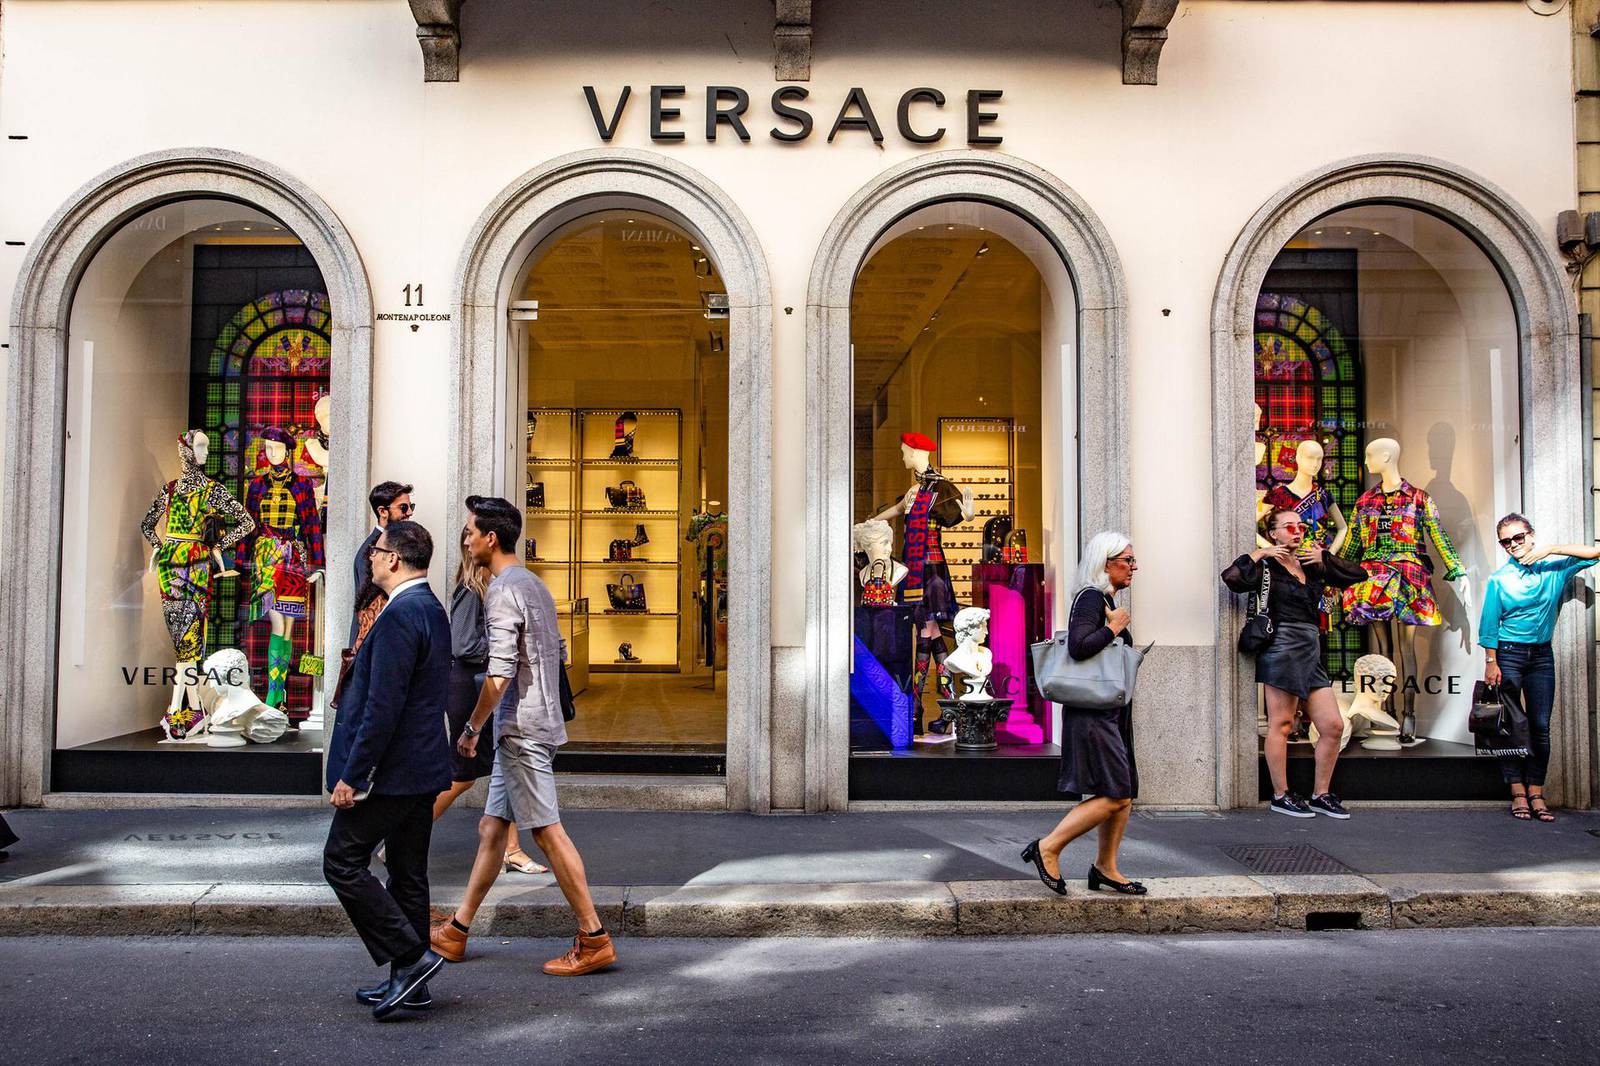 Versace owner expects supply chain disruptions to last half a year more